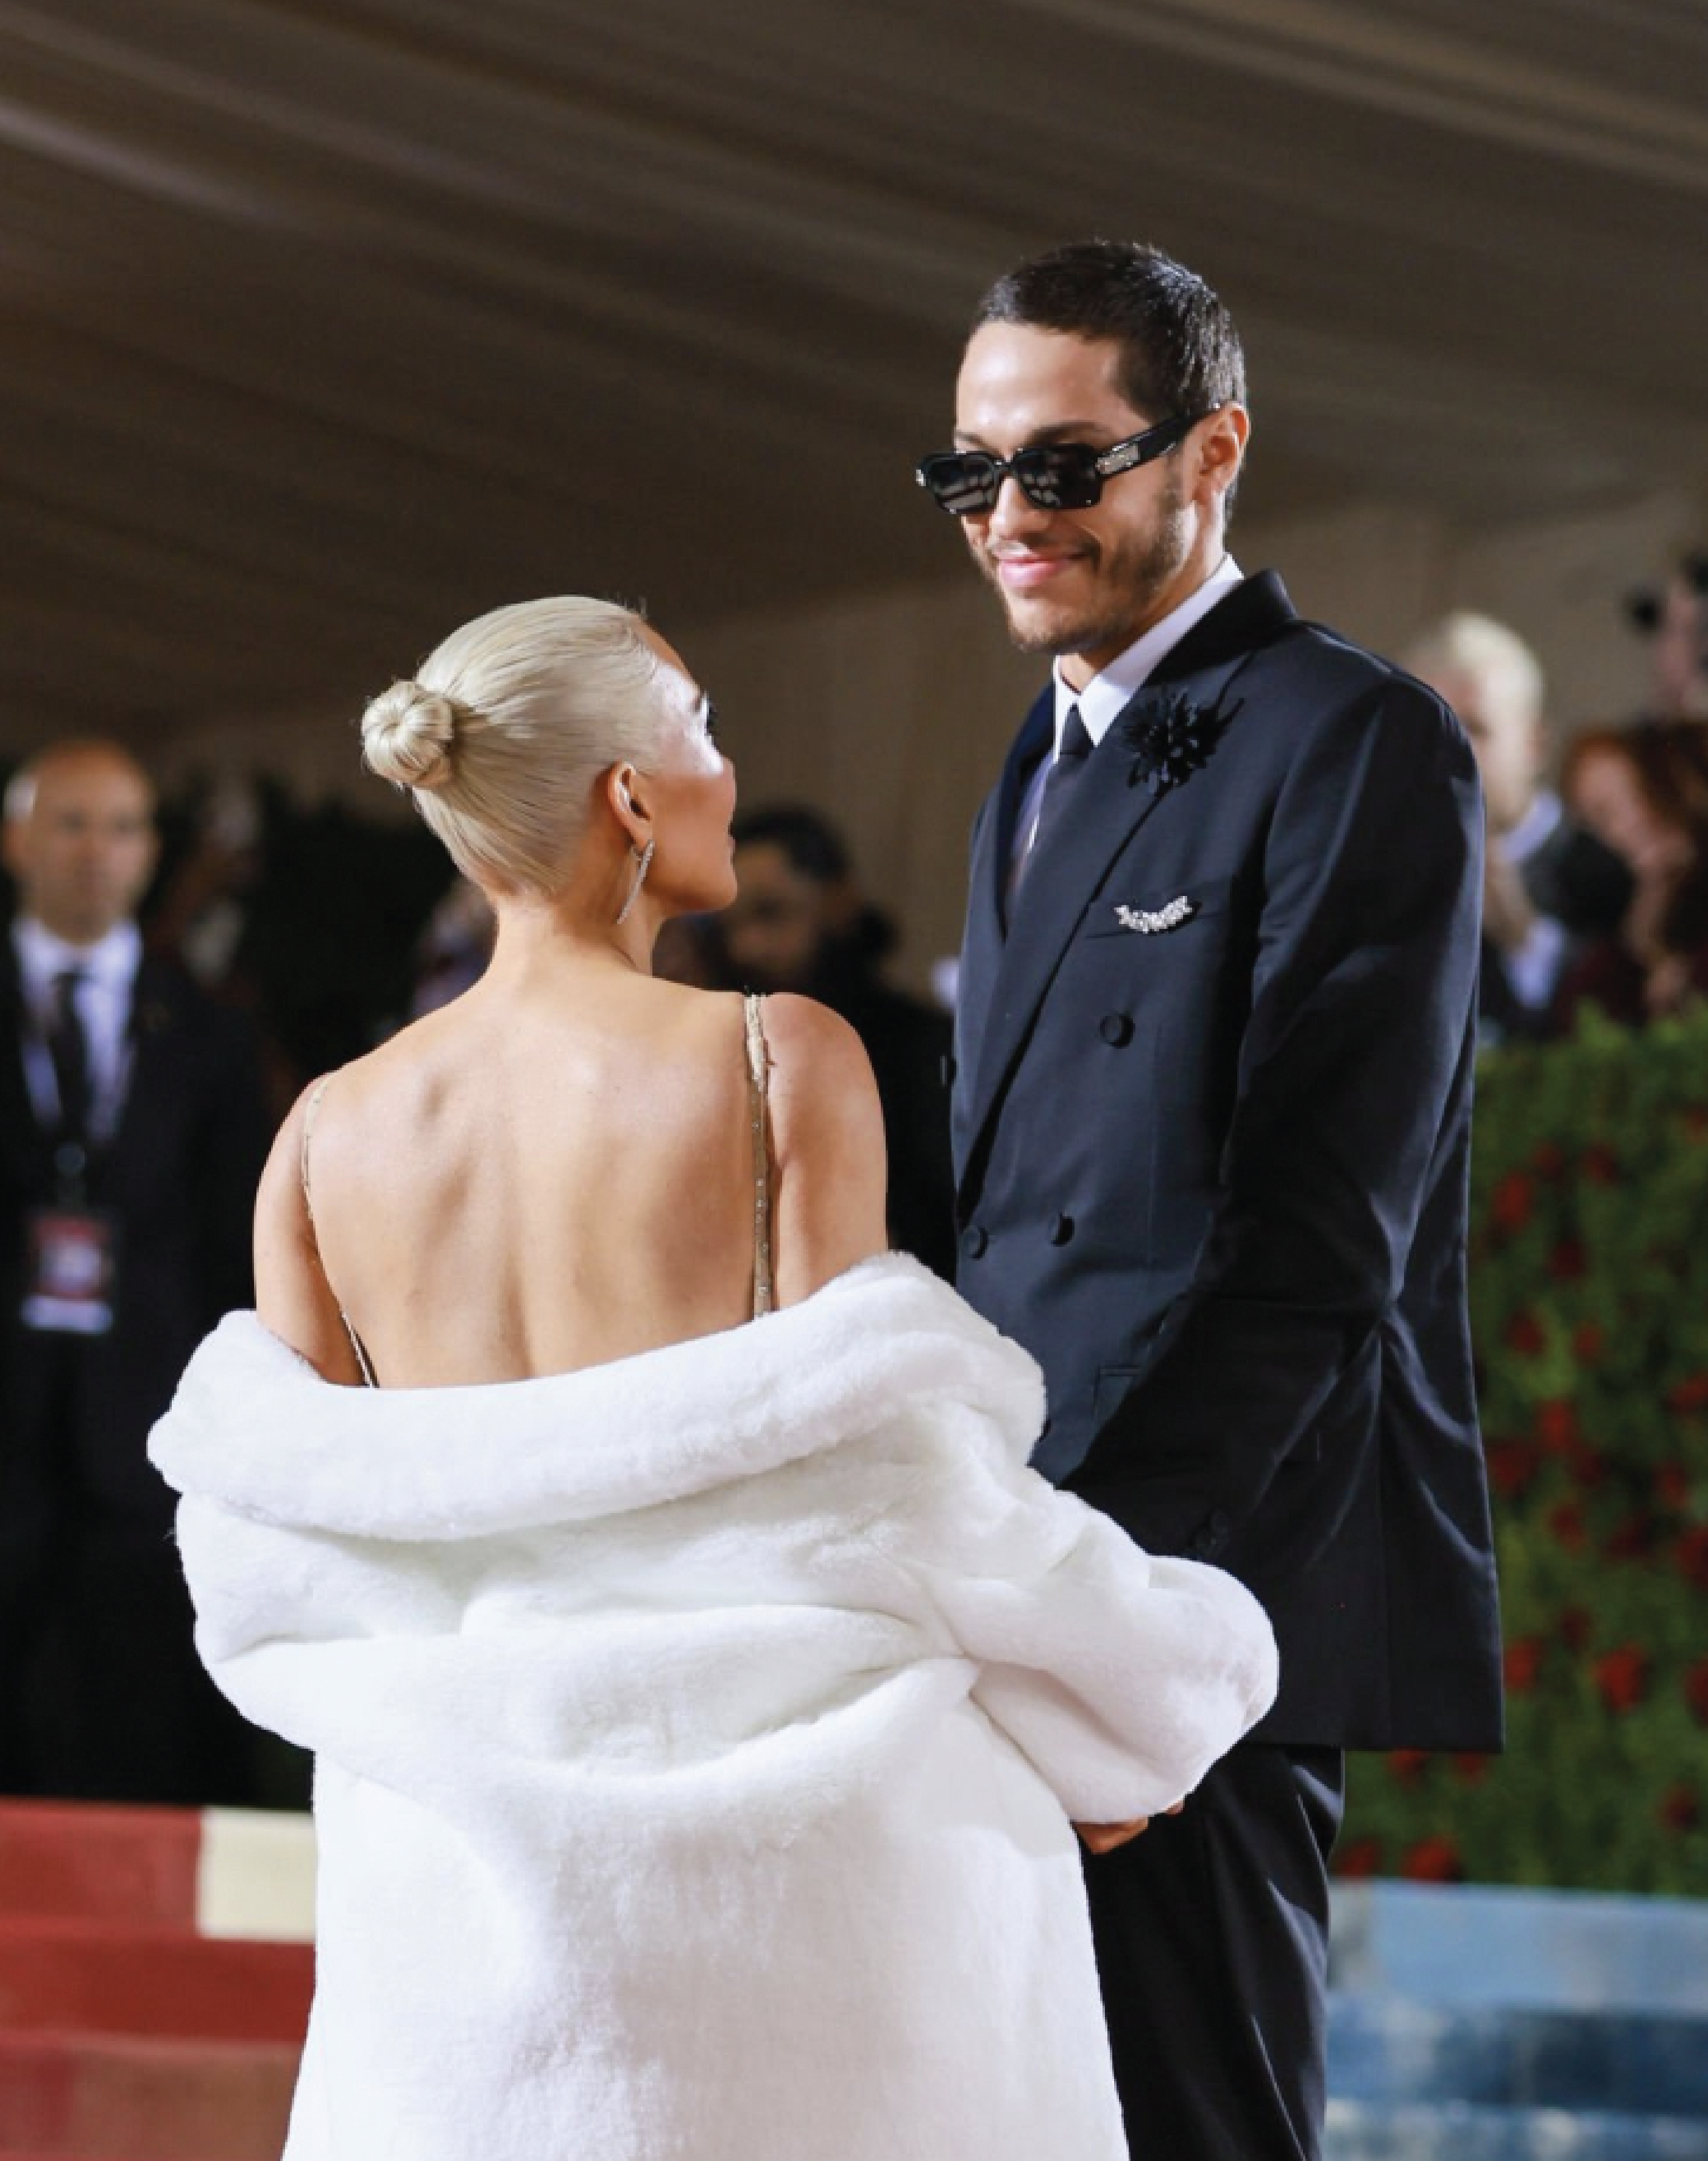 Pete Davidson and Kim Kardashian at the 2022 Met Gala. Pete wore a custom lapel pin from Or & Elle - the Branche d'Arbre - which was made with pear-shaped diamonds (15 total carat weight), all of which were D color, IF/ VVS clarity. Or & Elle specializes in creating the most iconic custom pieces for all occasions.